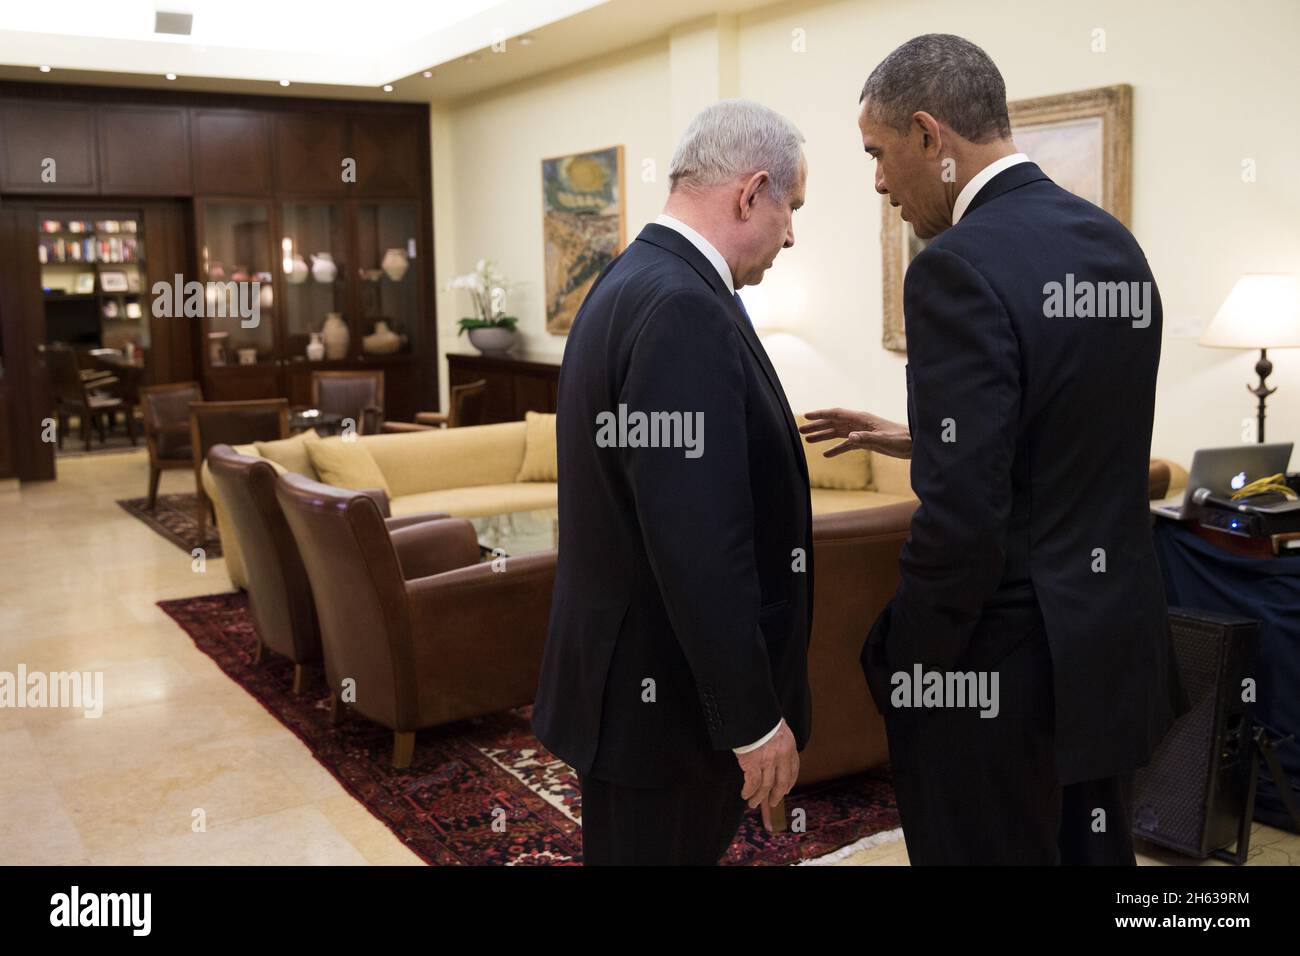 President Barack Obama talks with Israeli Prime Minister Benjamin Netanyahu before a press conference at the Prime Minister’s residence in Jerusalem, March 20, 2013 Stock Photo